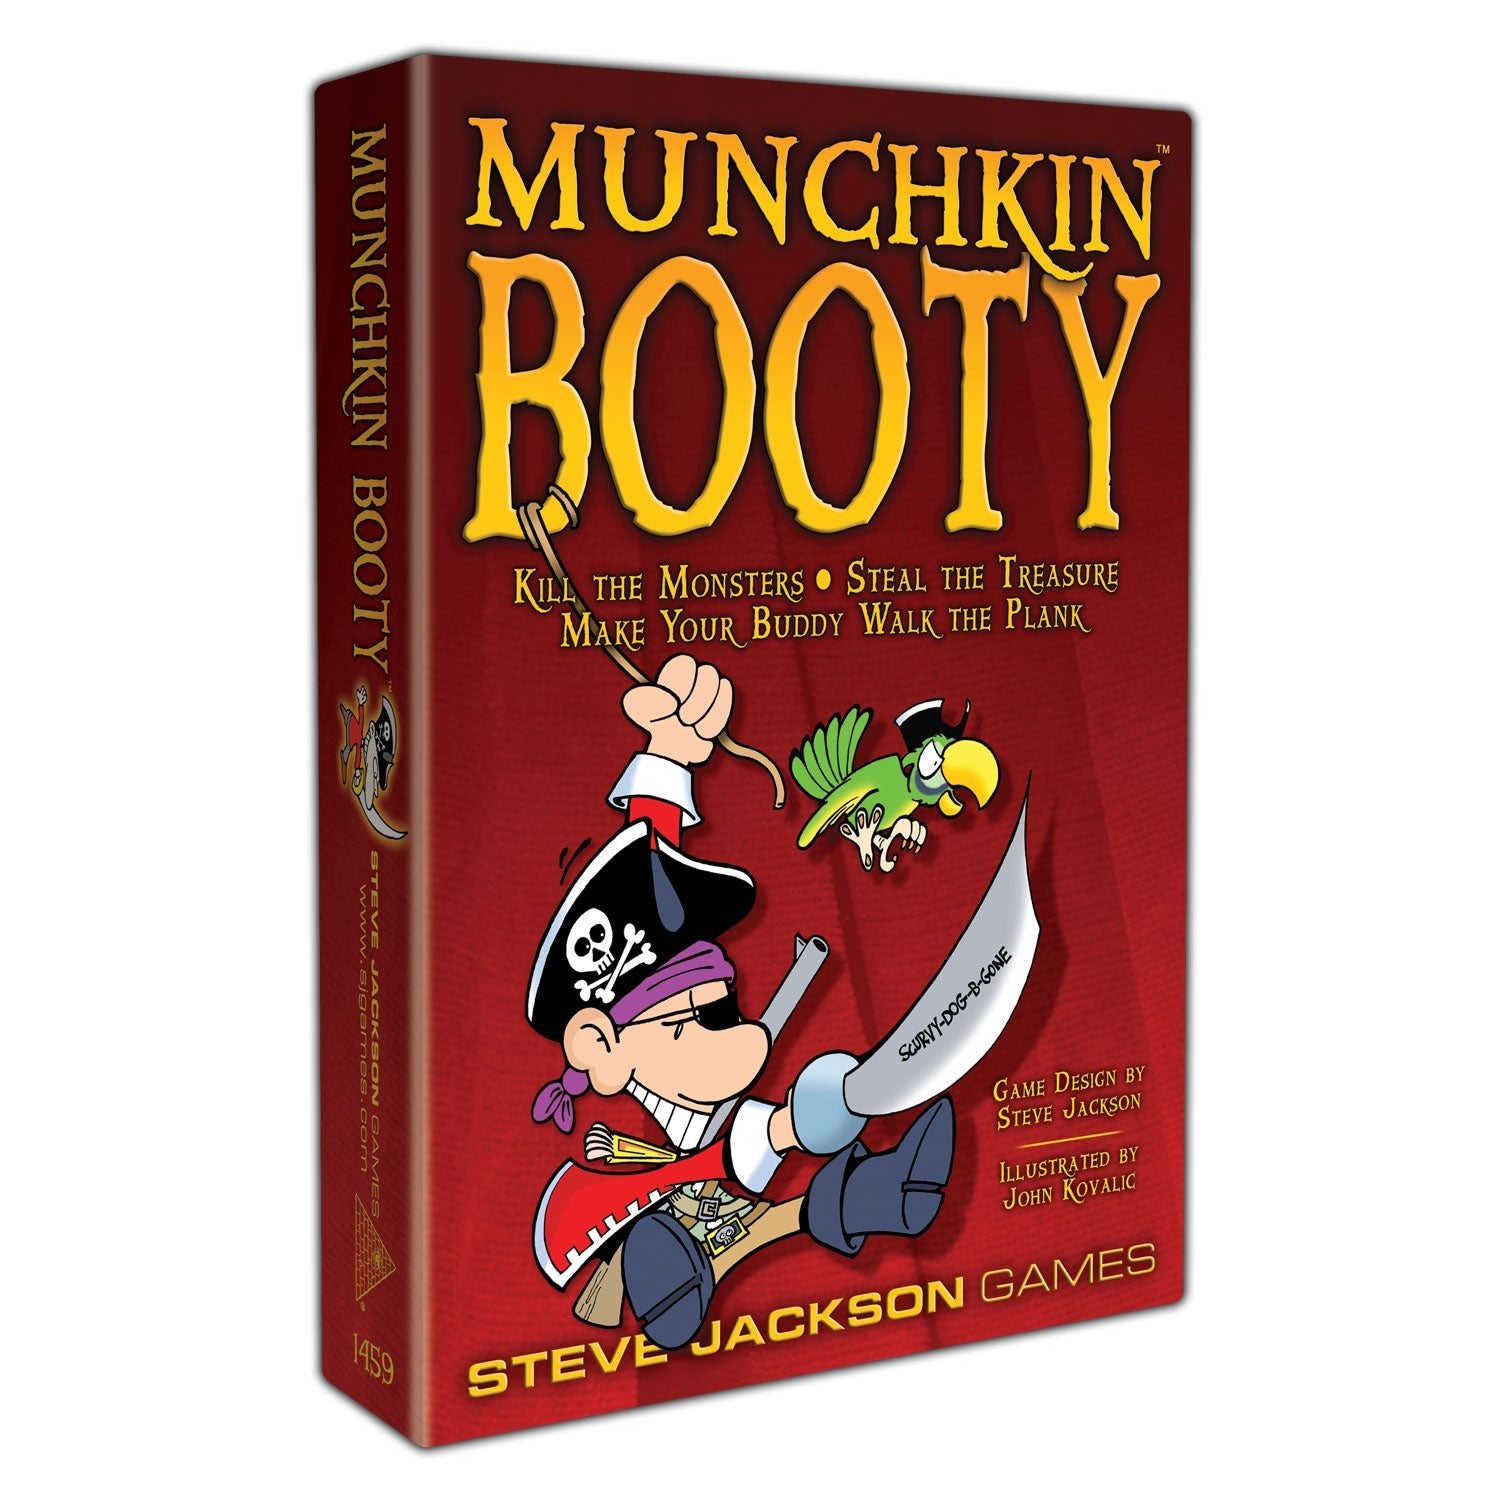 Munchkin: Munchkin Booty (Revised) - The Fourth Place